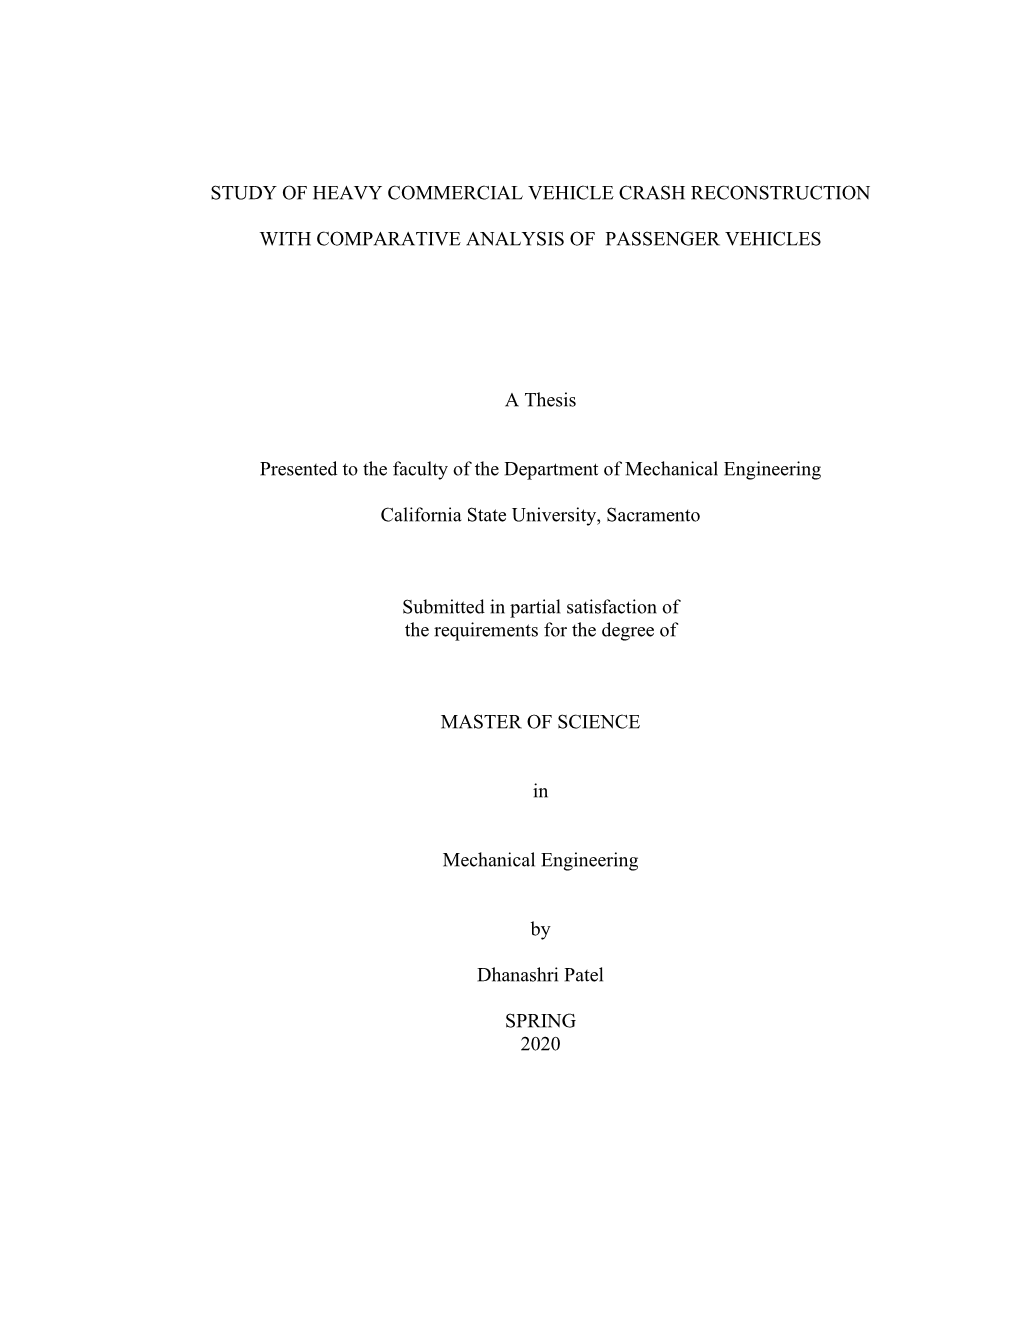 Study of Heavy Commercial Vehicle Crash Reconstruction